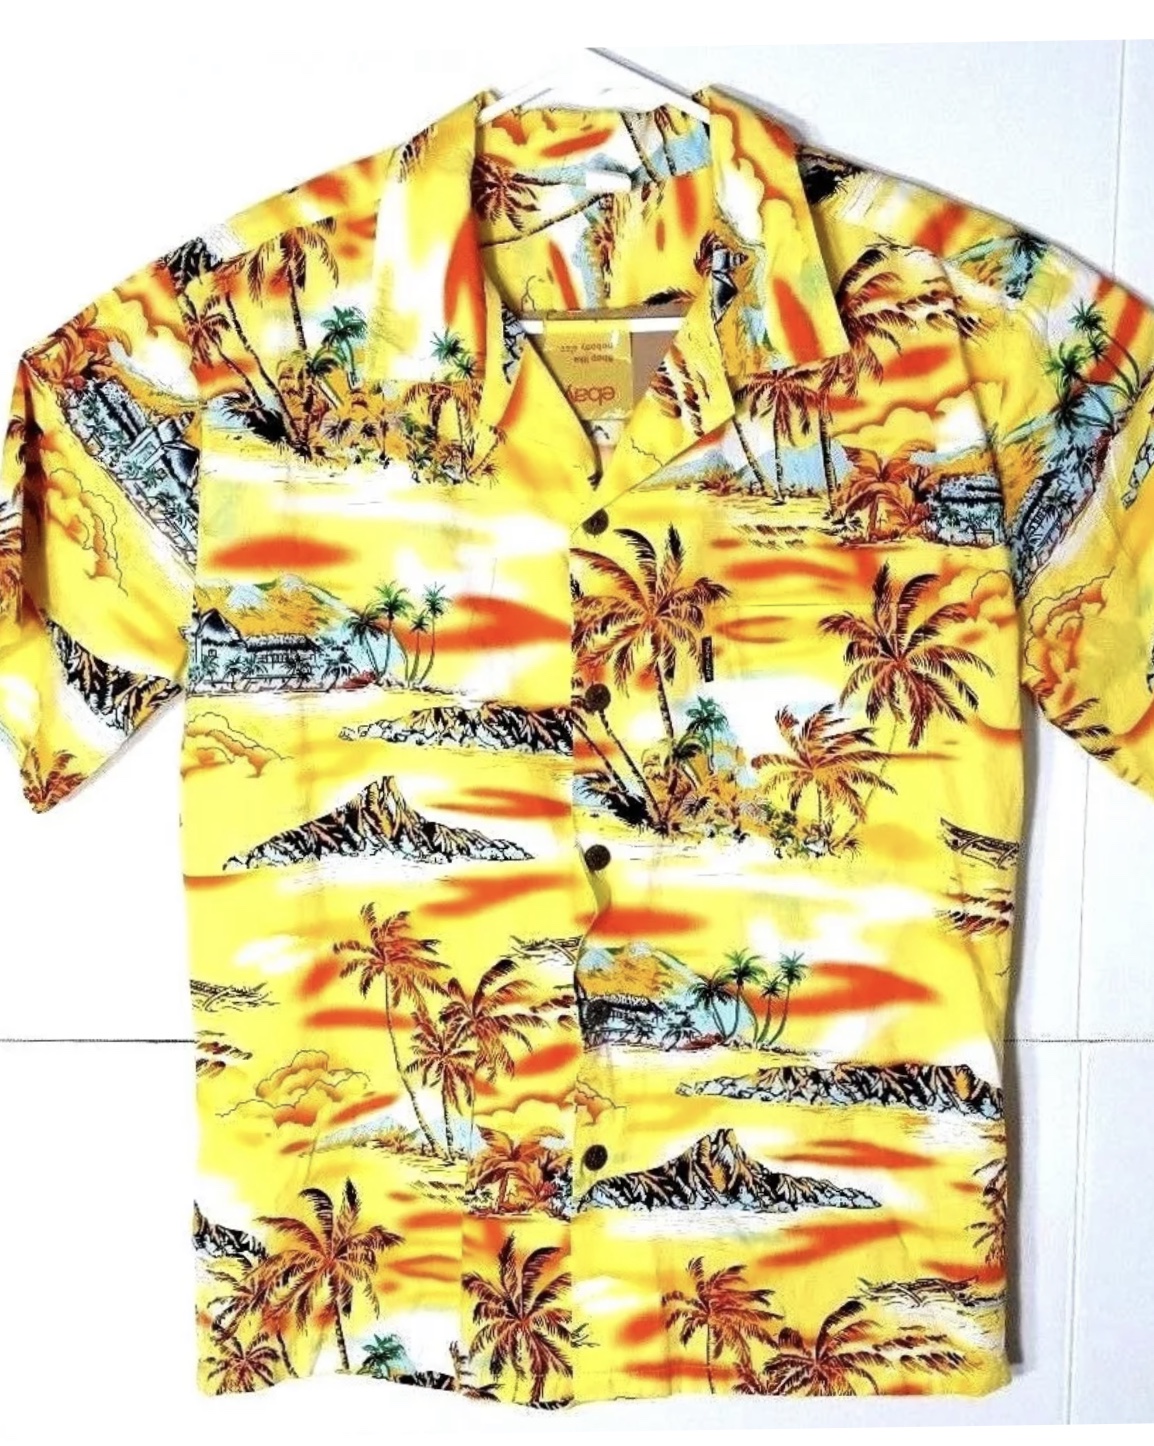 Brad Pitt's Once Upon a Time in Hollywood Hawaiian shirt | RPF Costume and  Prop Maker Community